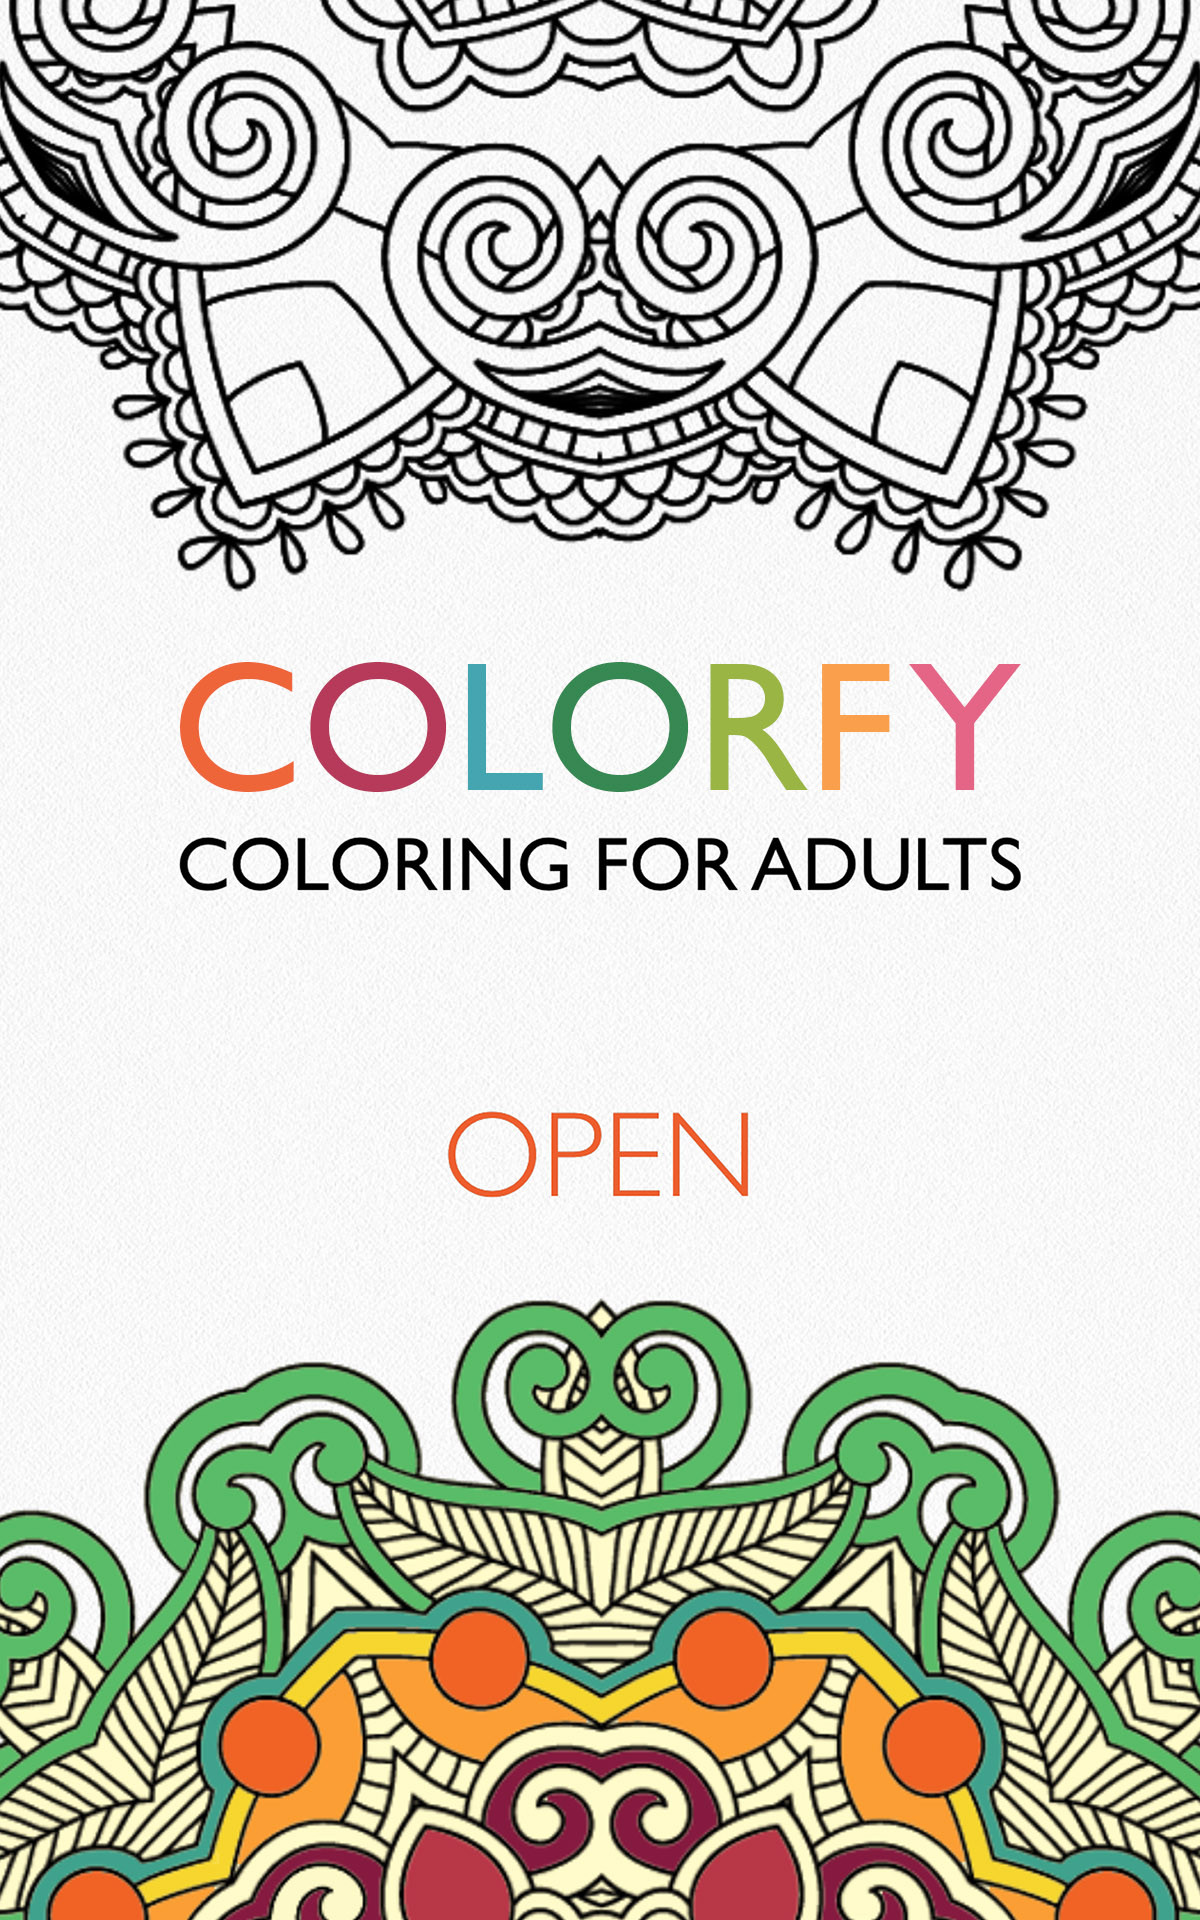 Amazon Adults Coloring Book
 Amazon Colorfy Coloring Book for Adults Free